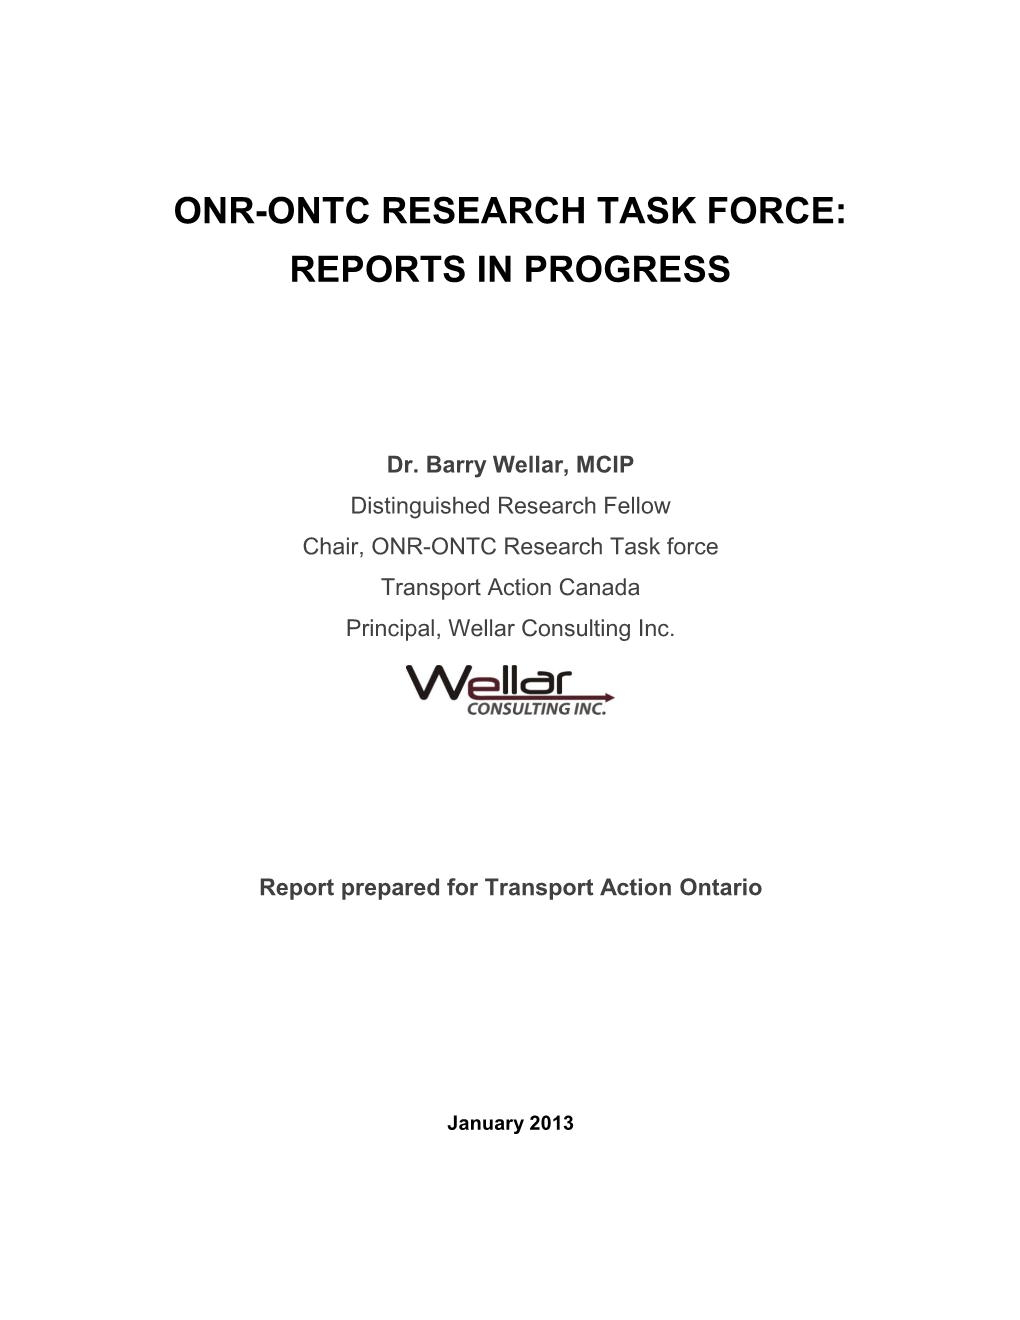 Onr-Ontc Research Task Force: Reports in Progress